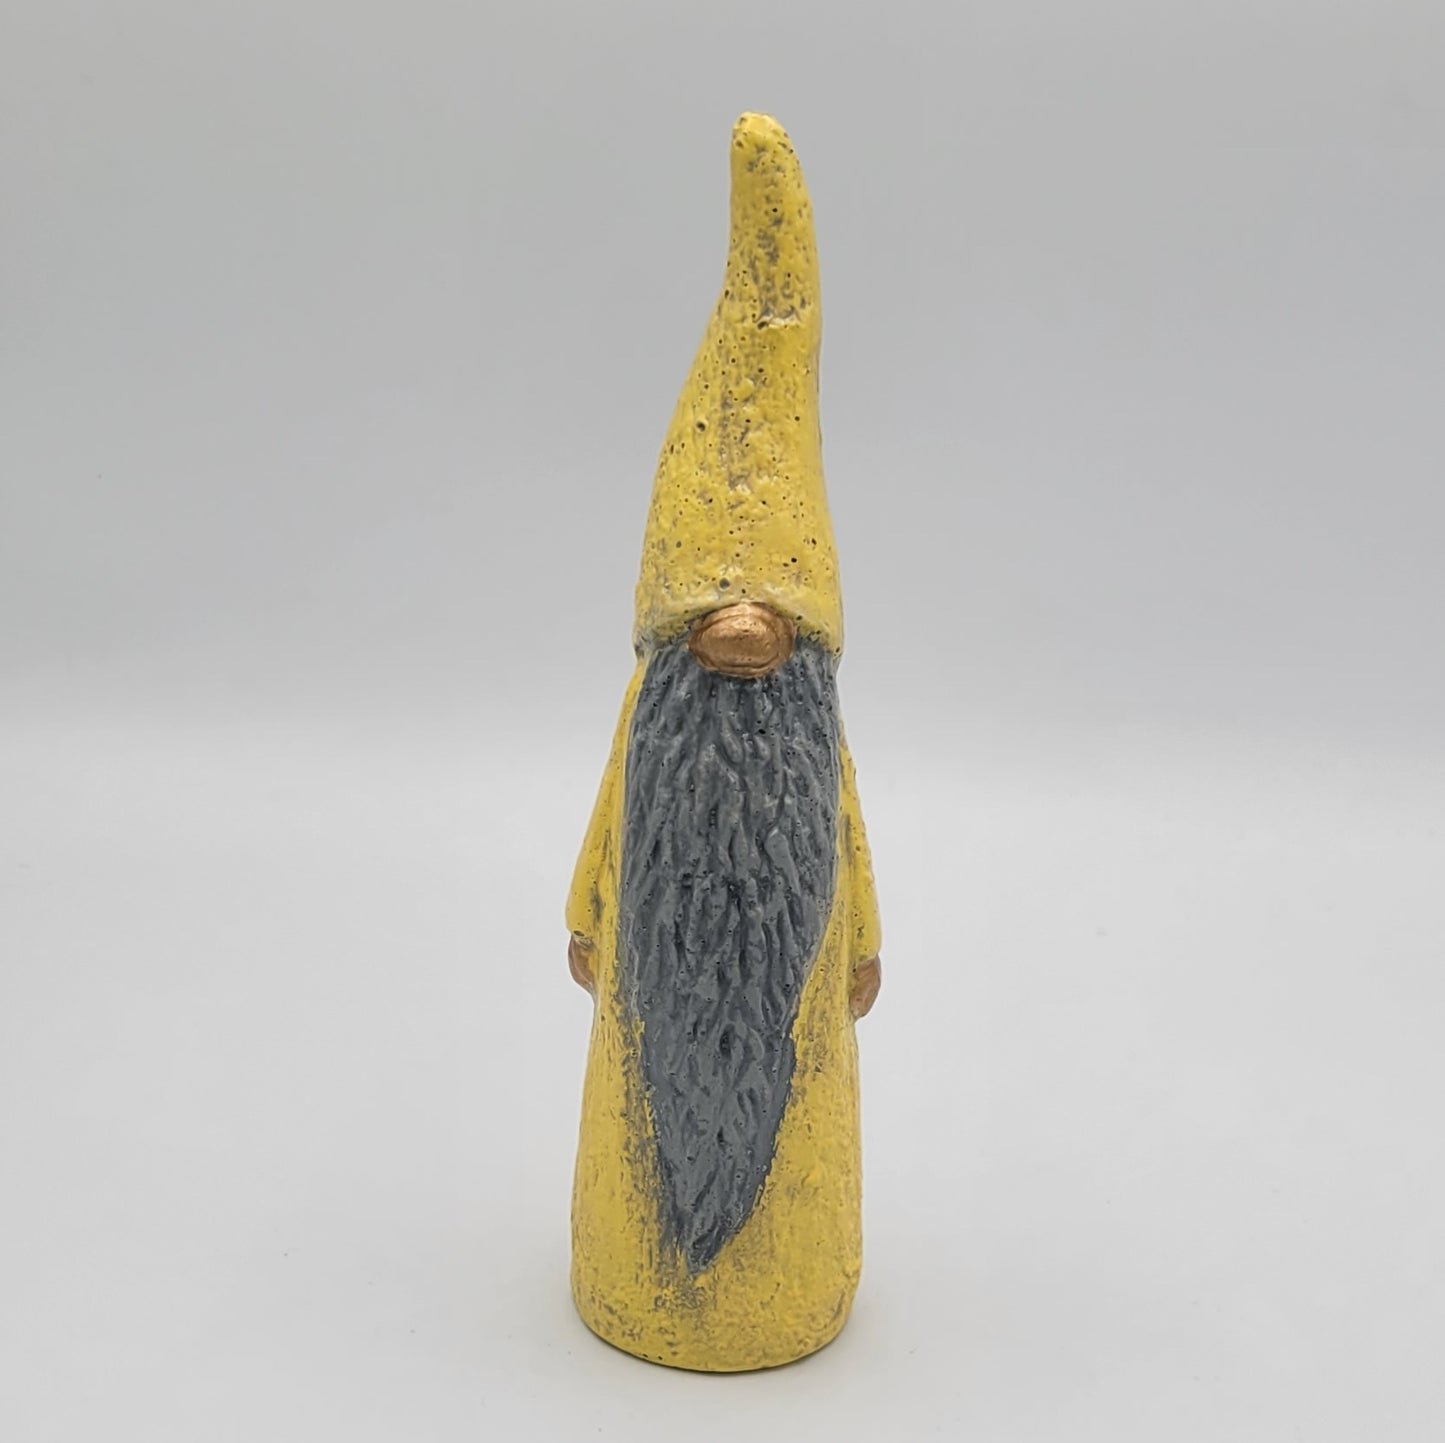 Willow Gnome